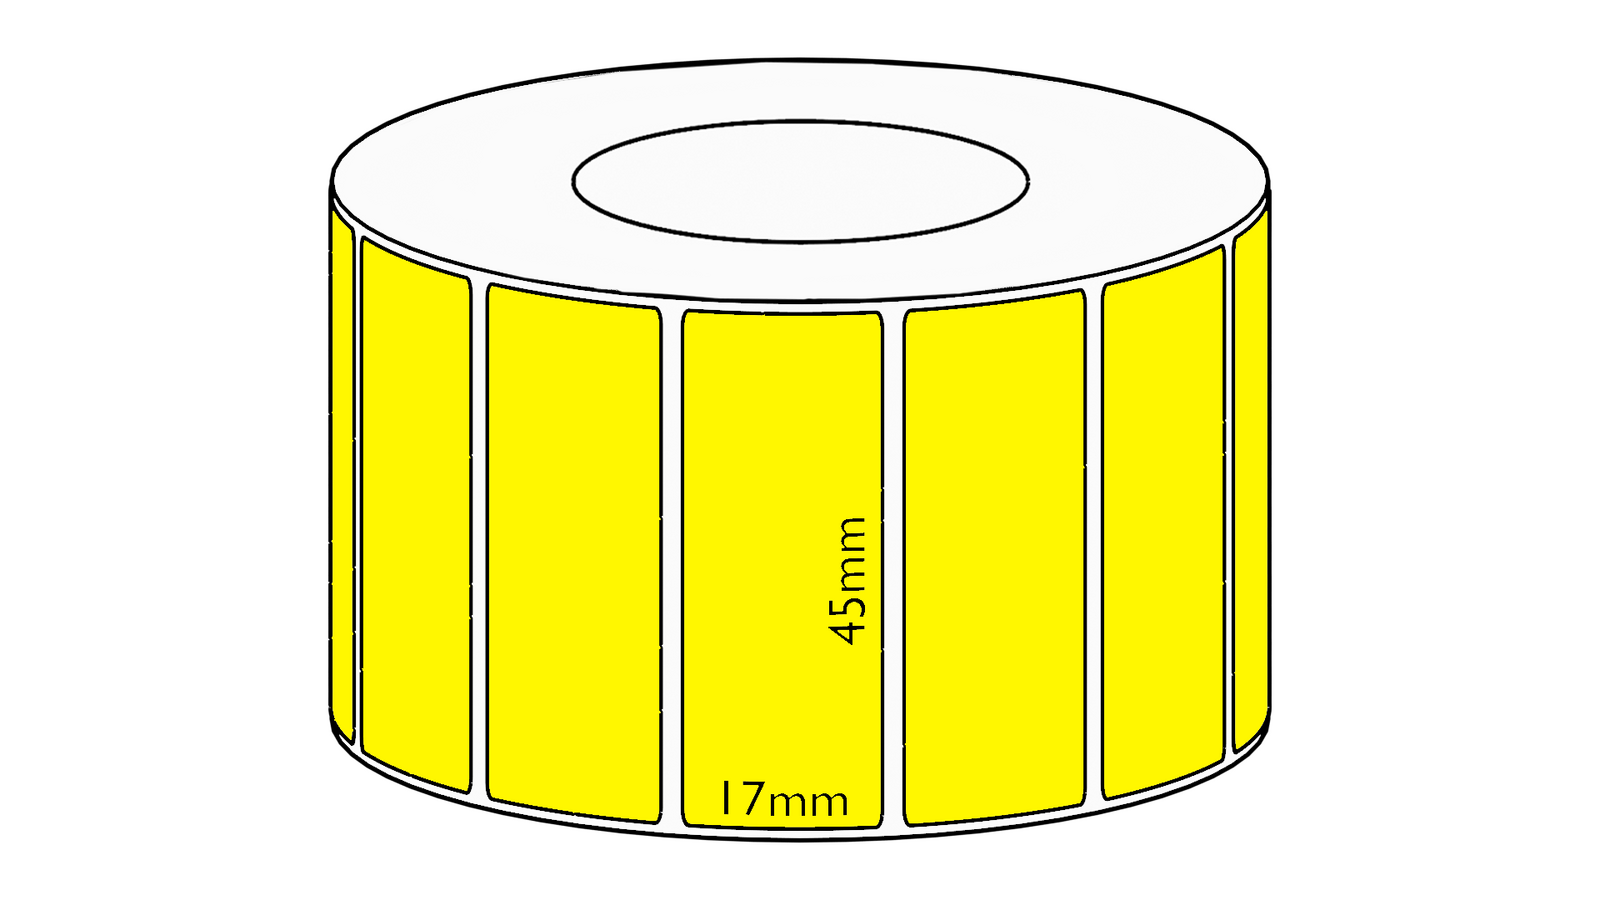 45x17mm Yellow Direct Thermal Permanent Label, 7500 per roll, 76mm core